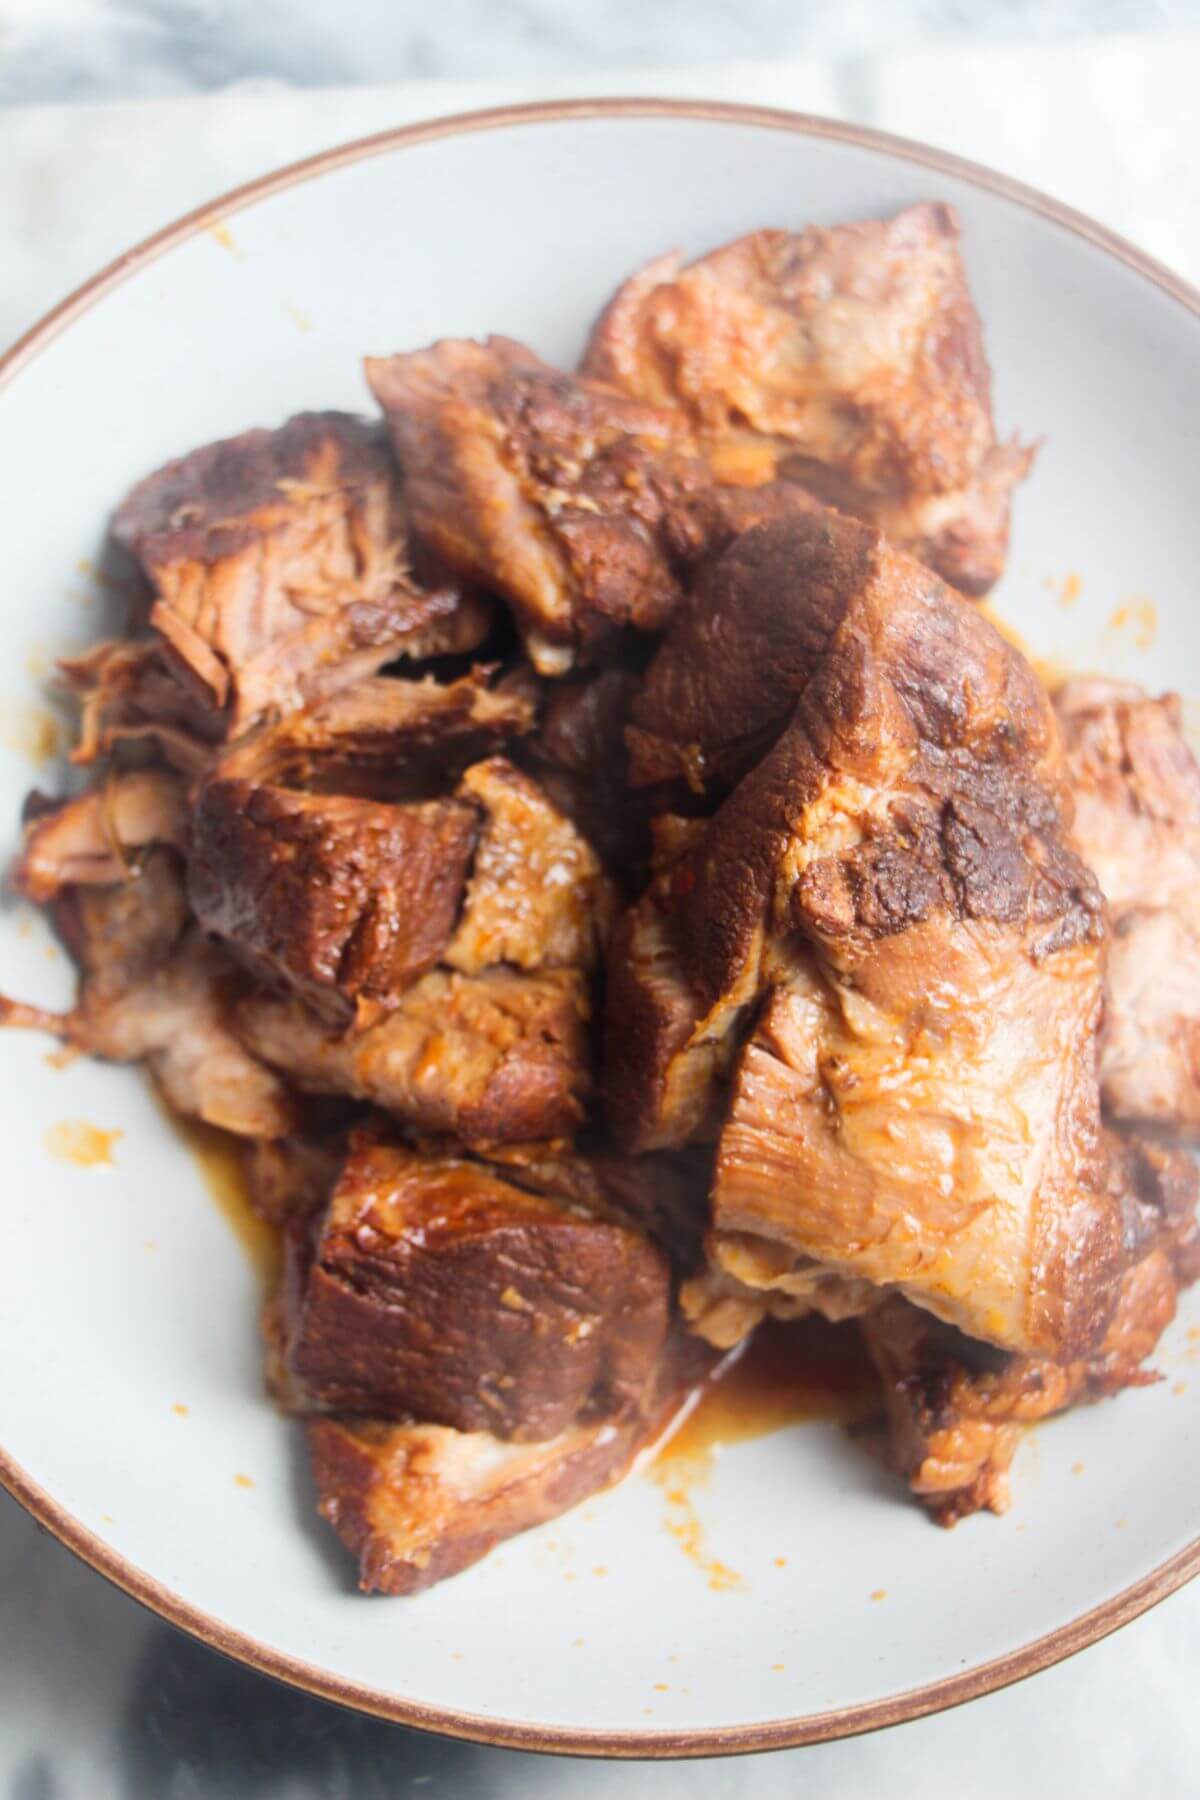 Cooked pieces of pork shoulder in a shallow bowl.